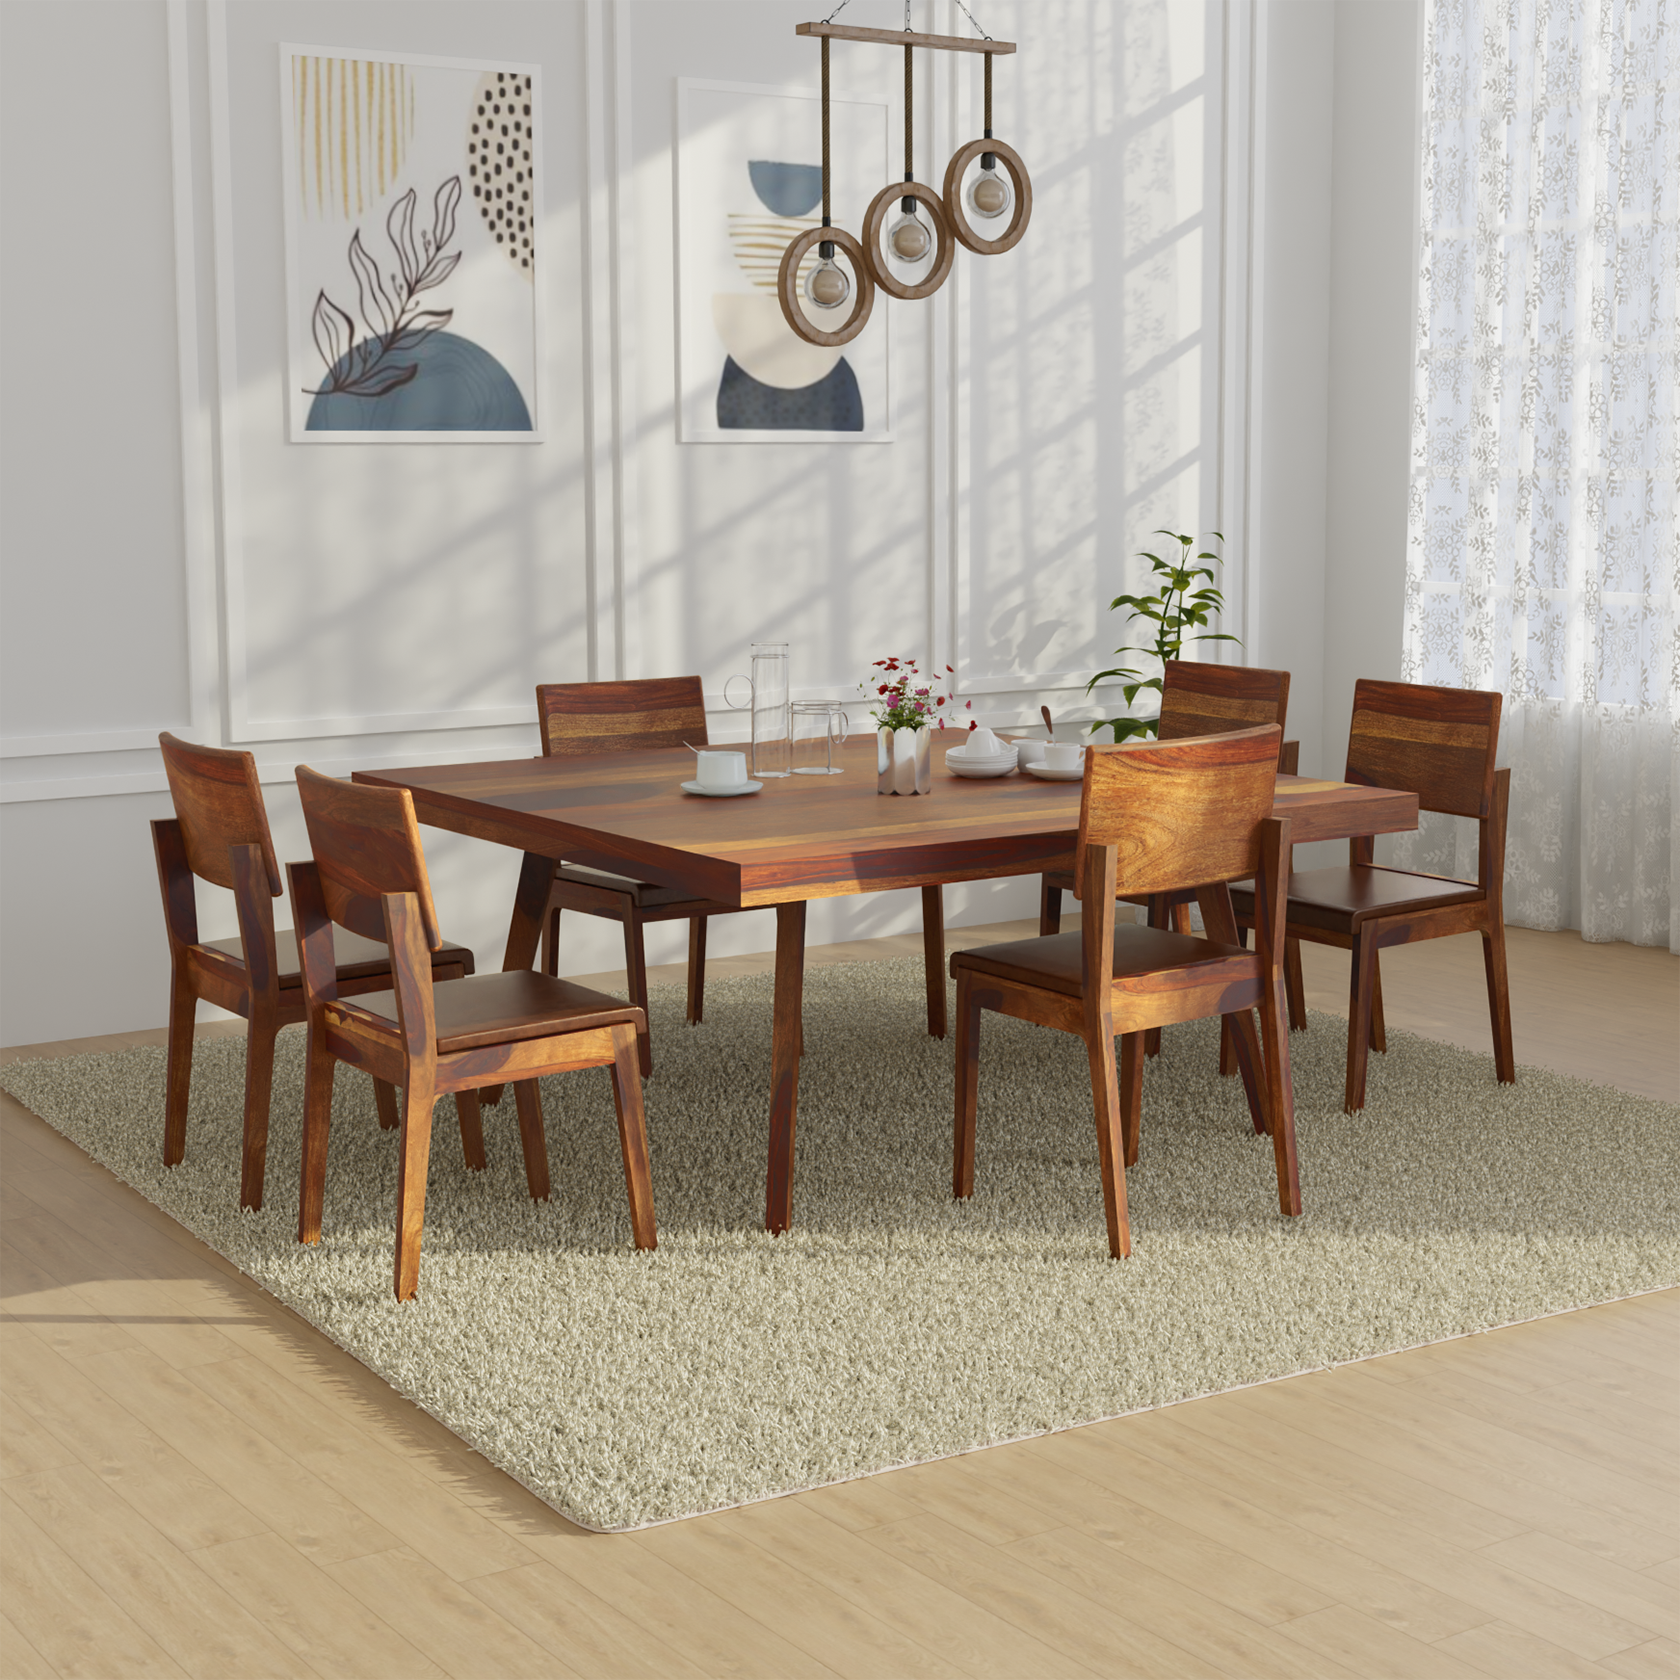 Resonance Sheesham wood Dining Table In Reddish Walnut color with 6 Seating